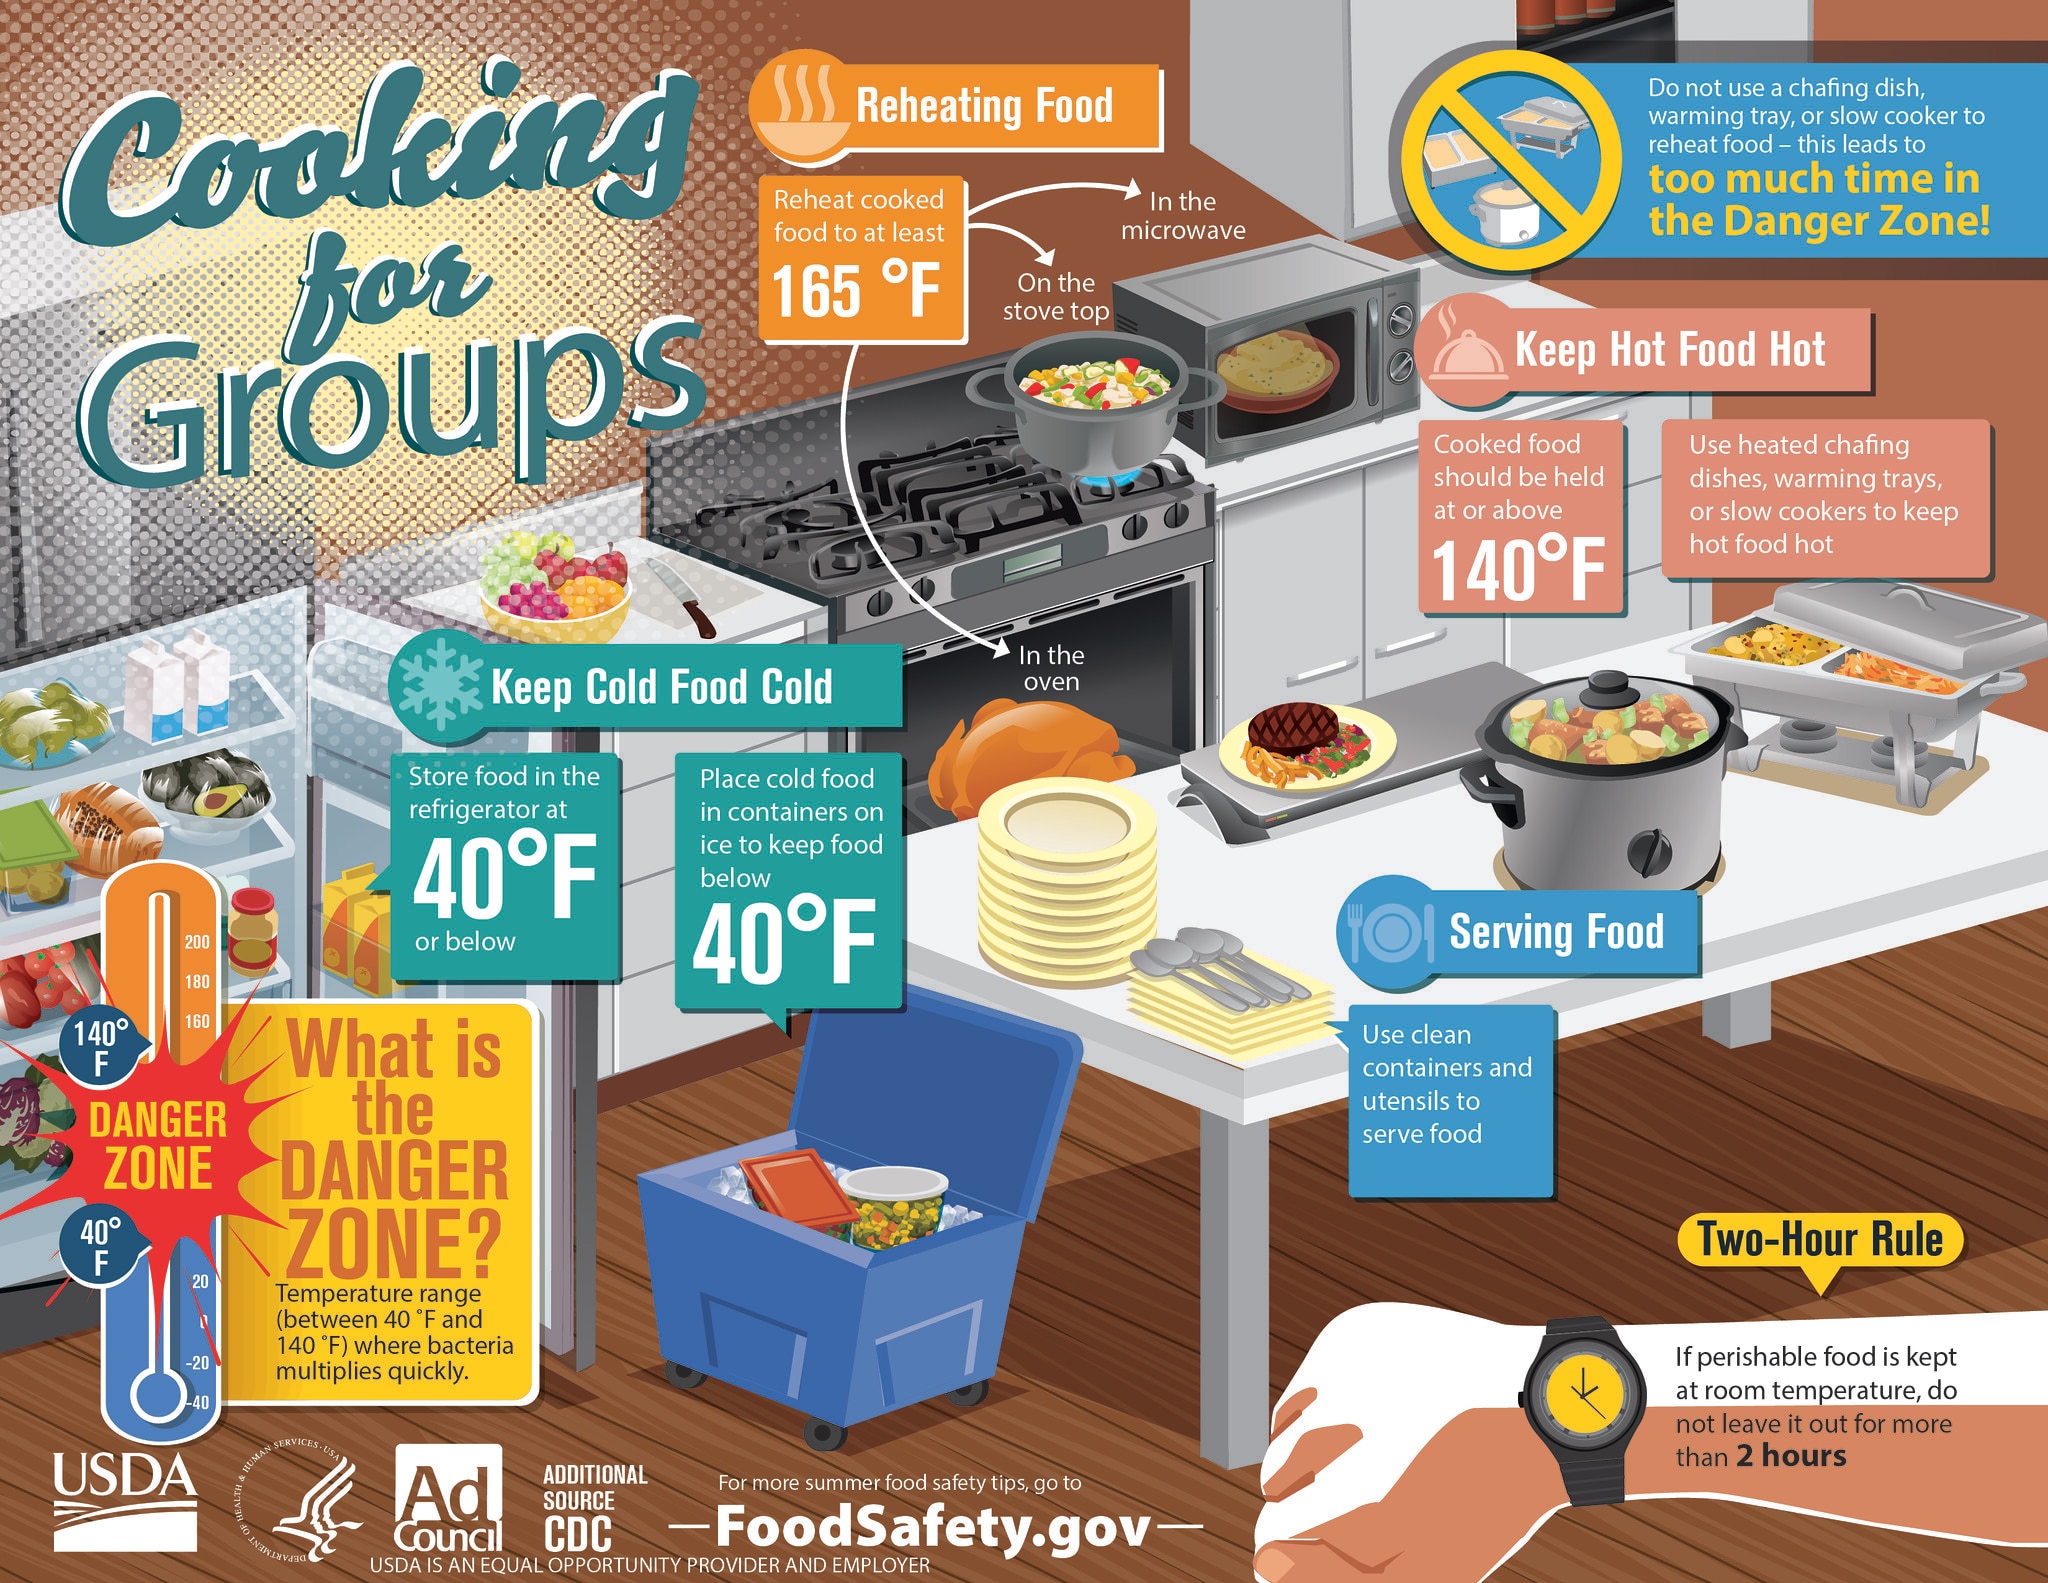 Infographic from FoodSafety.gov with tips for safely cooking food for parties and large groups.